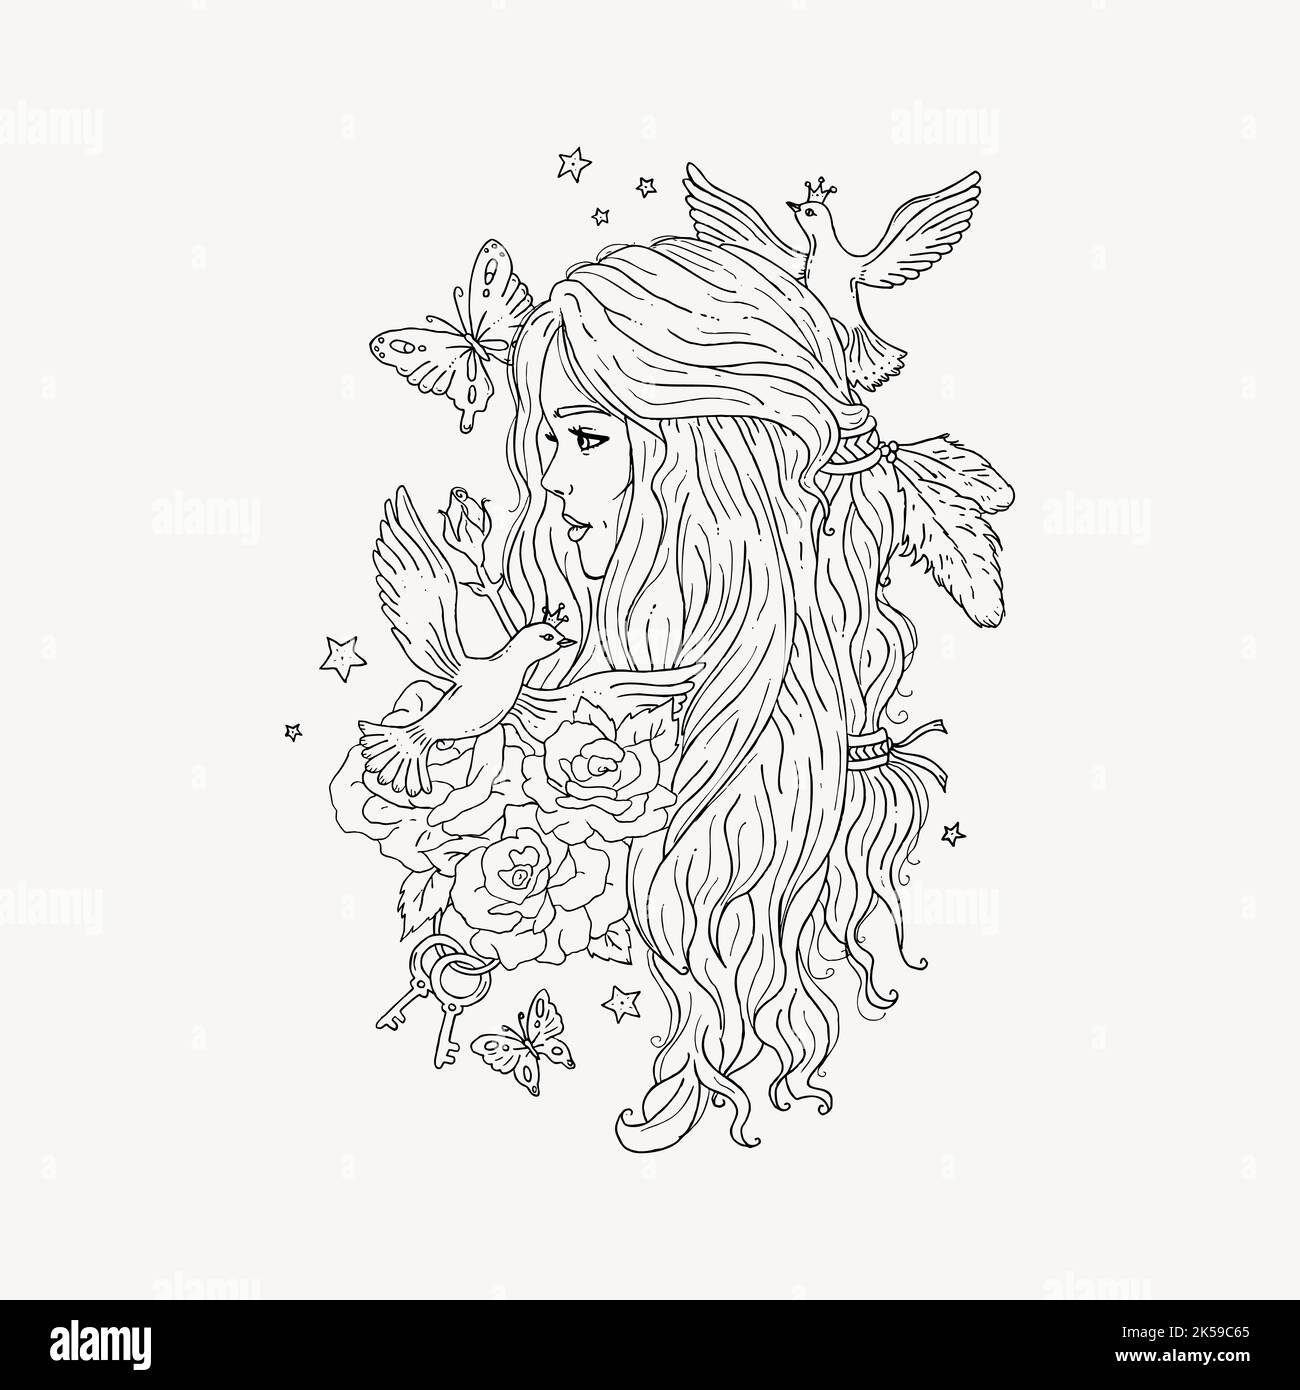 aesthetic black and white girl drawing | Art drawings beautiful, Drawing  sketches, Art drawings